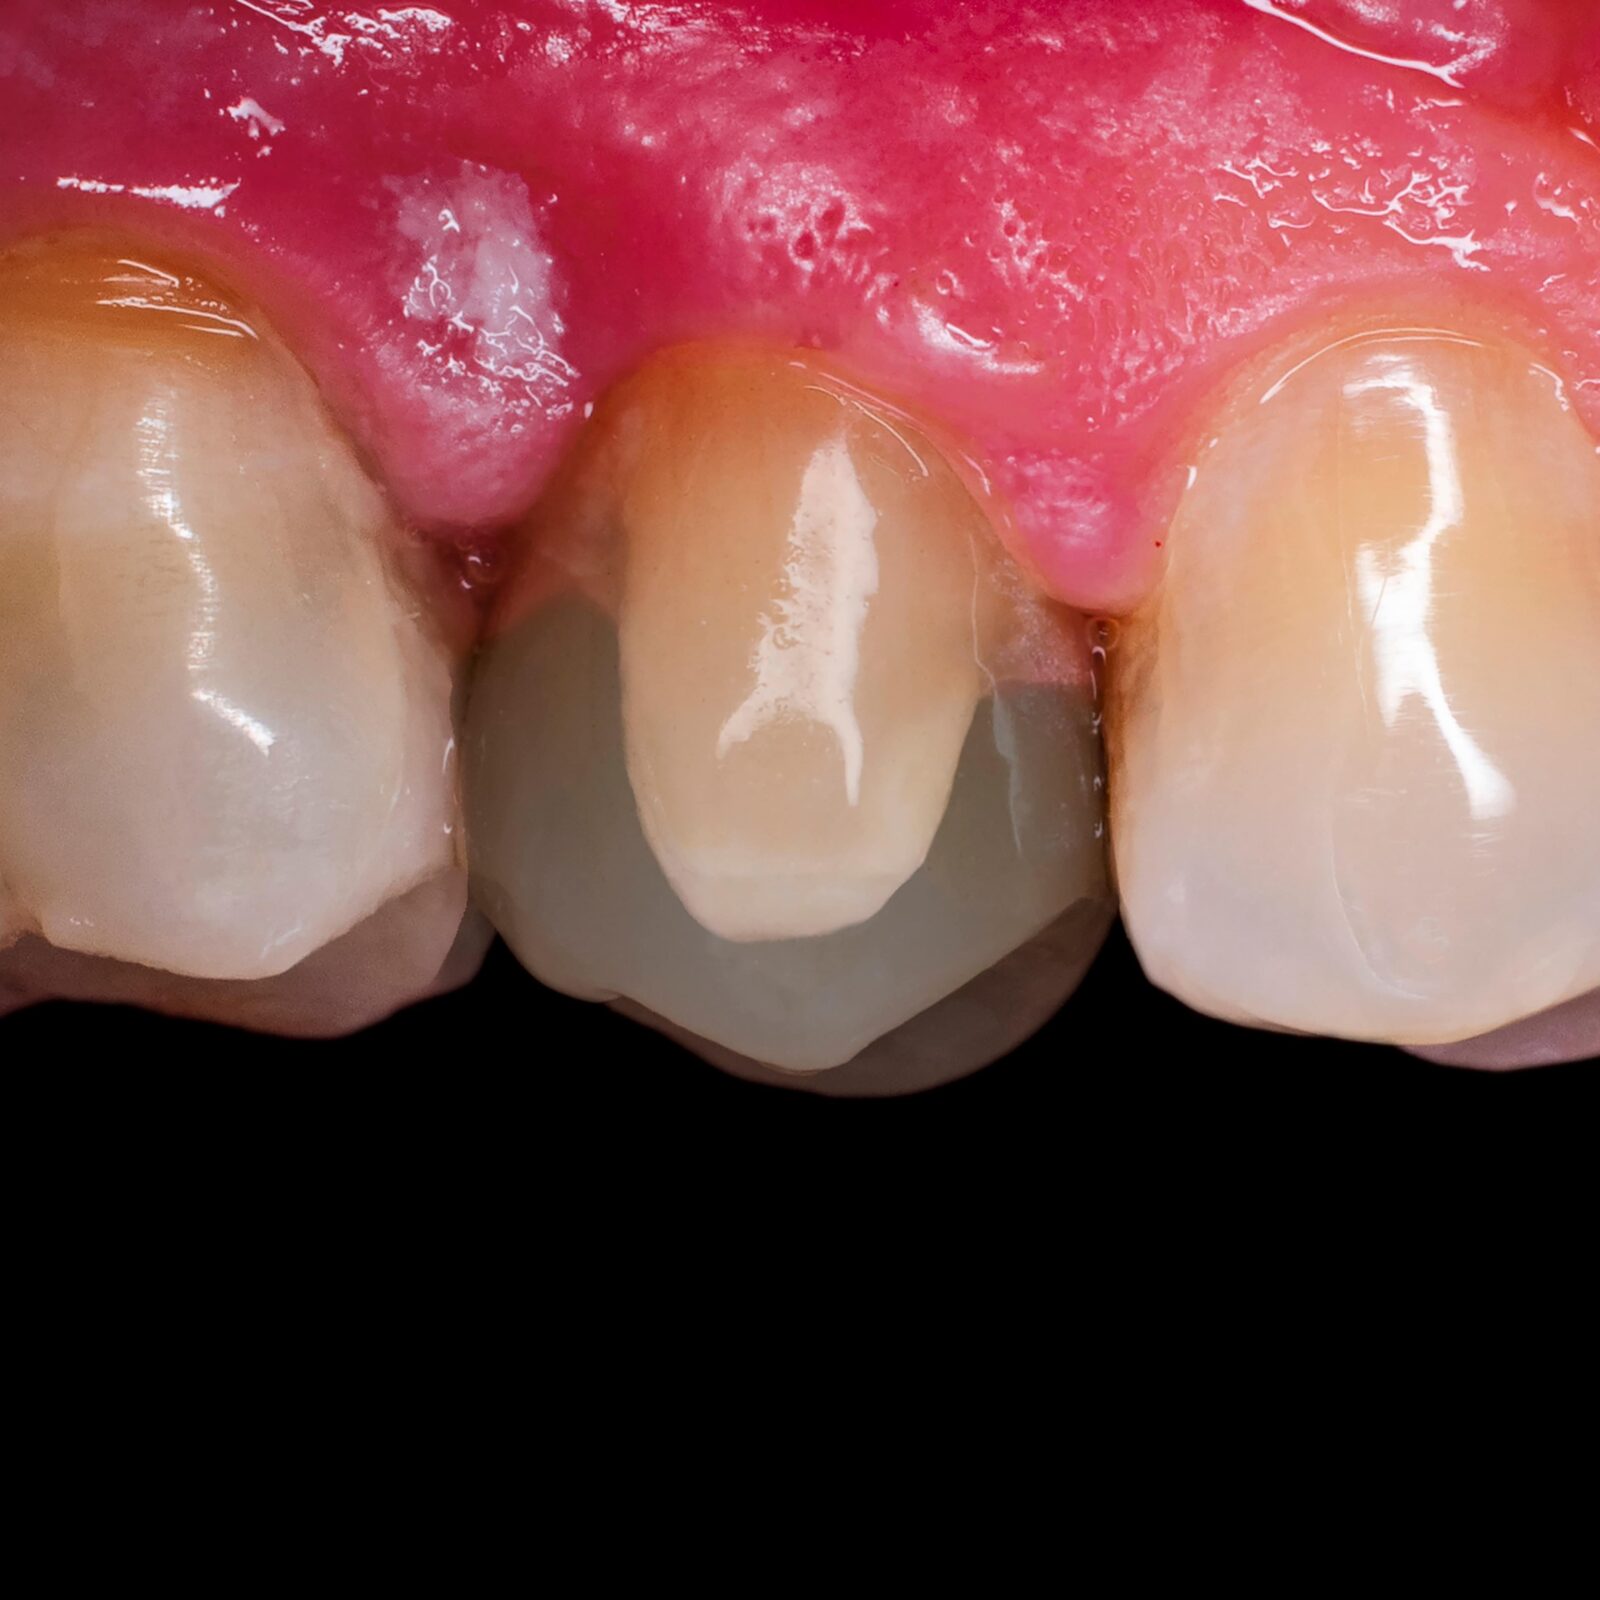 dental restoration shown over a modified tooth